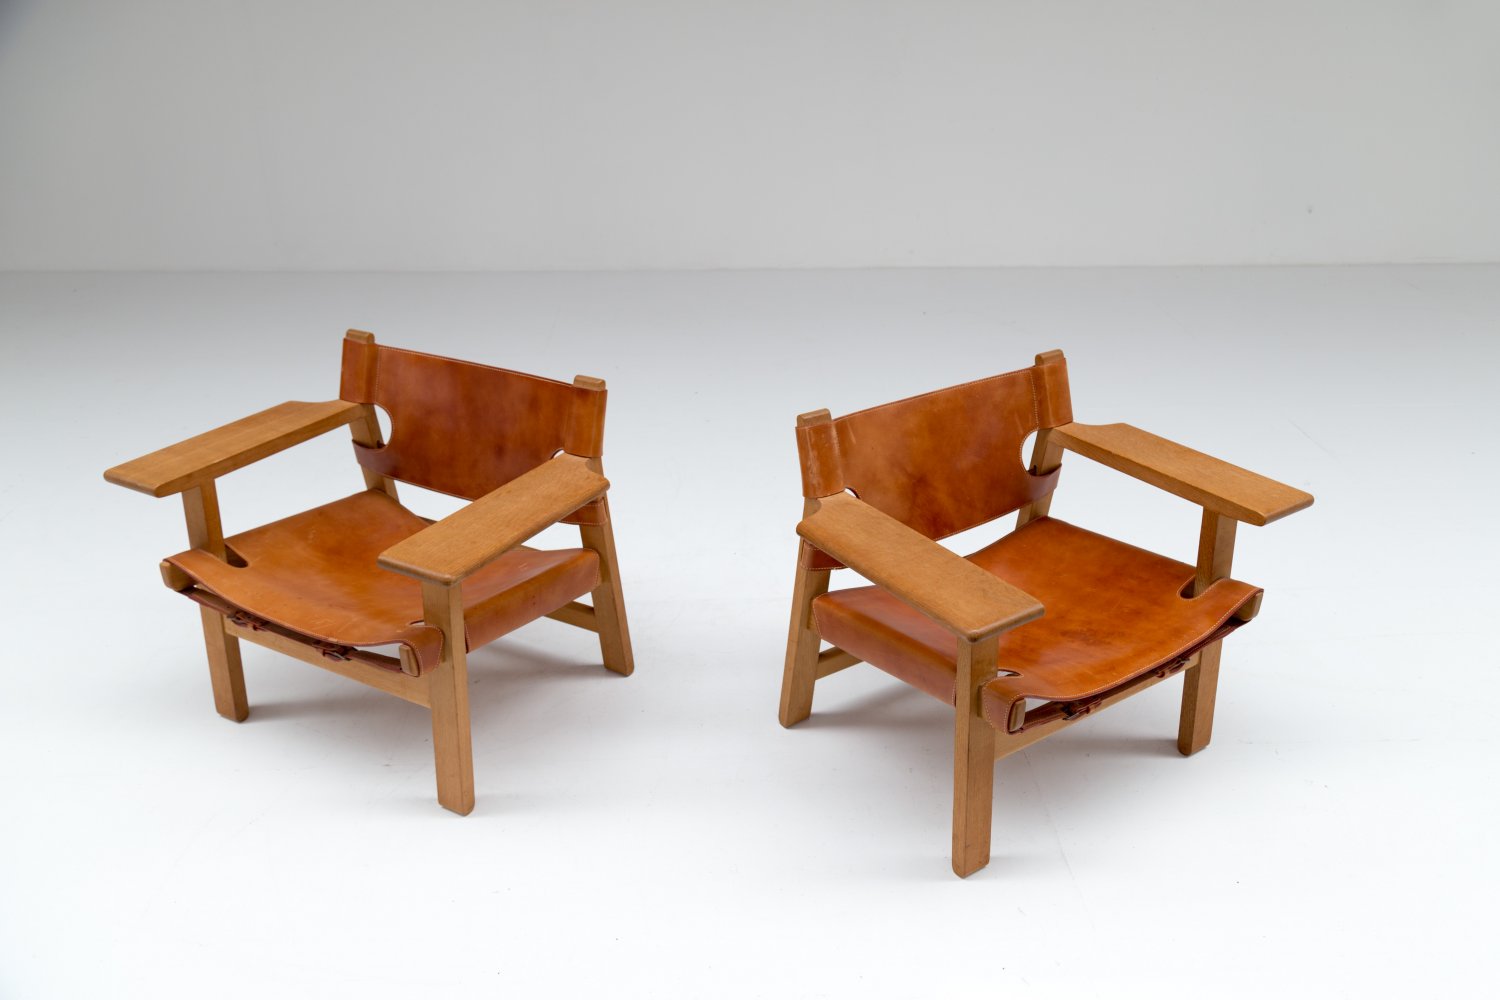 Pair of Spanish Chairs by Borge Mogensen